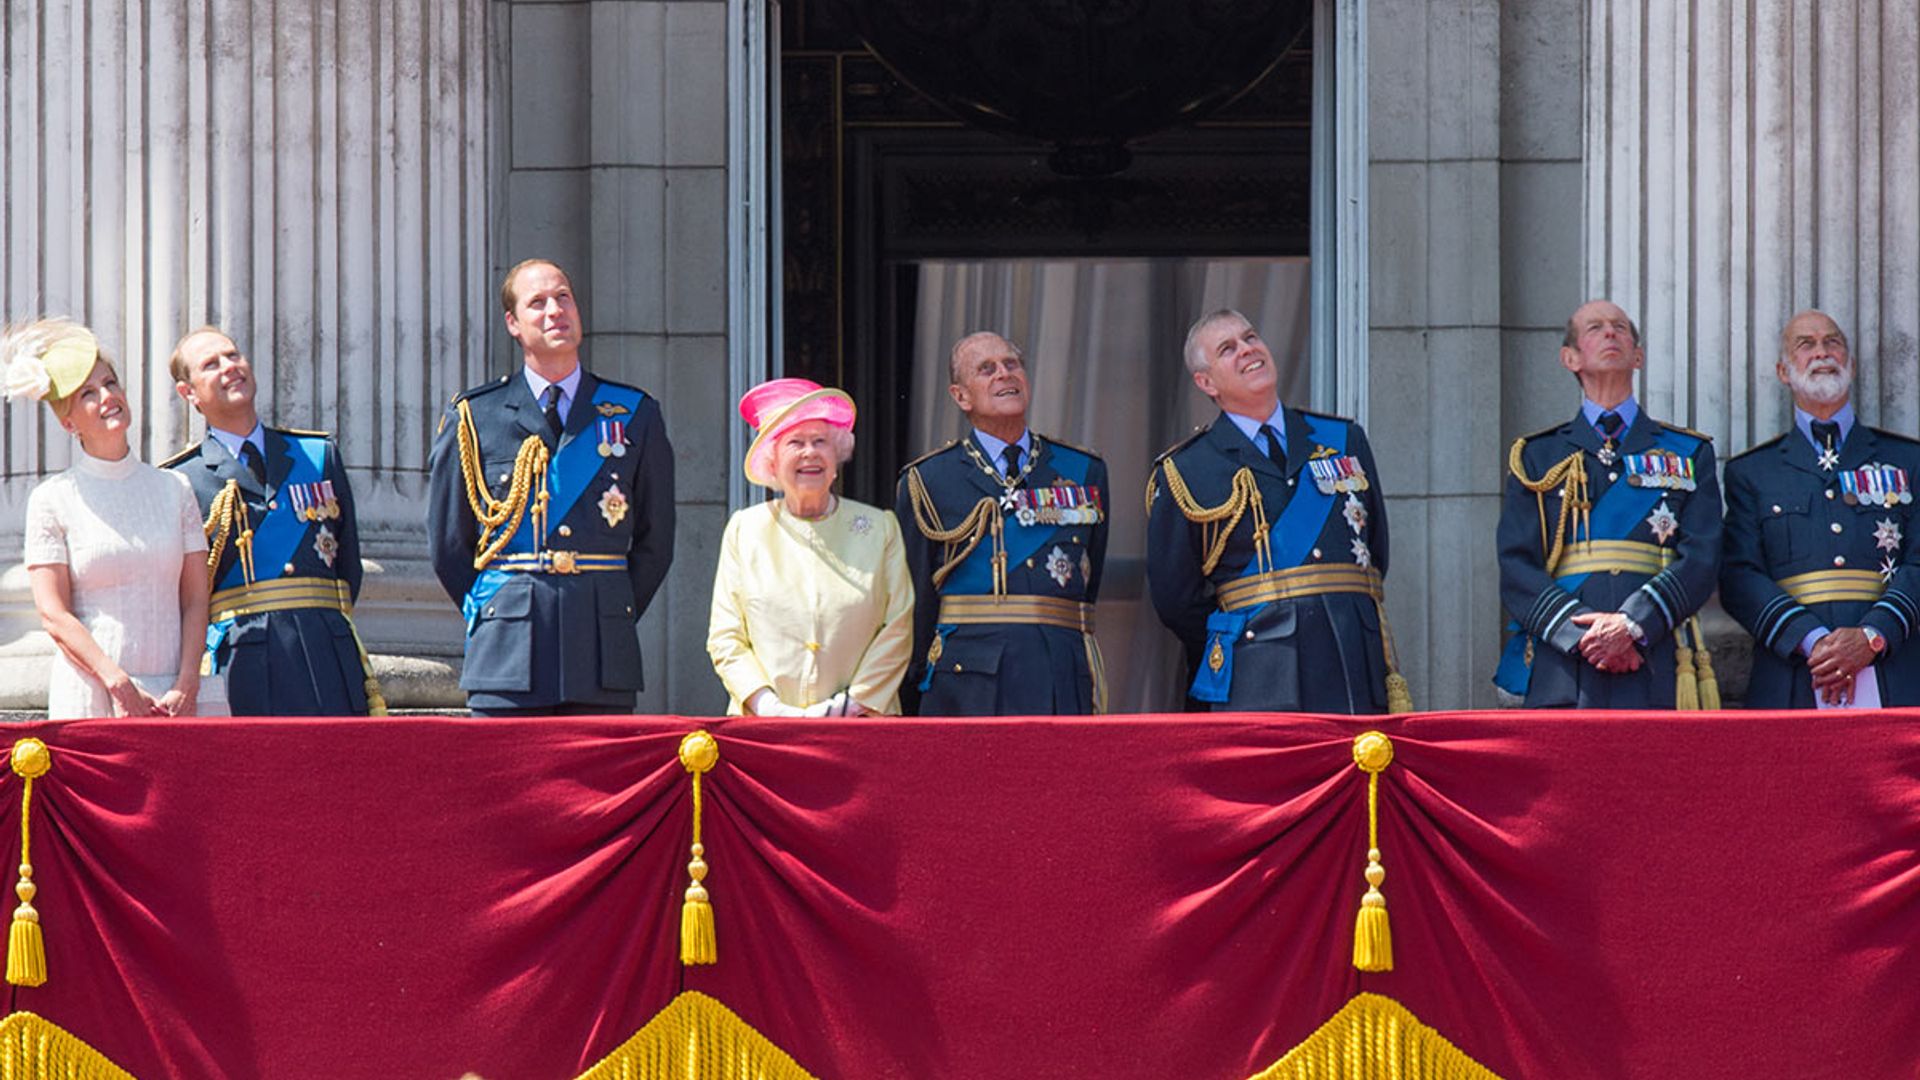 Special celebrations for the Queen and the rest of the British royal family